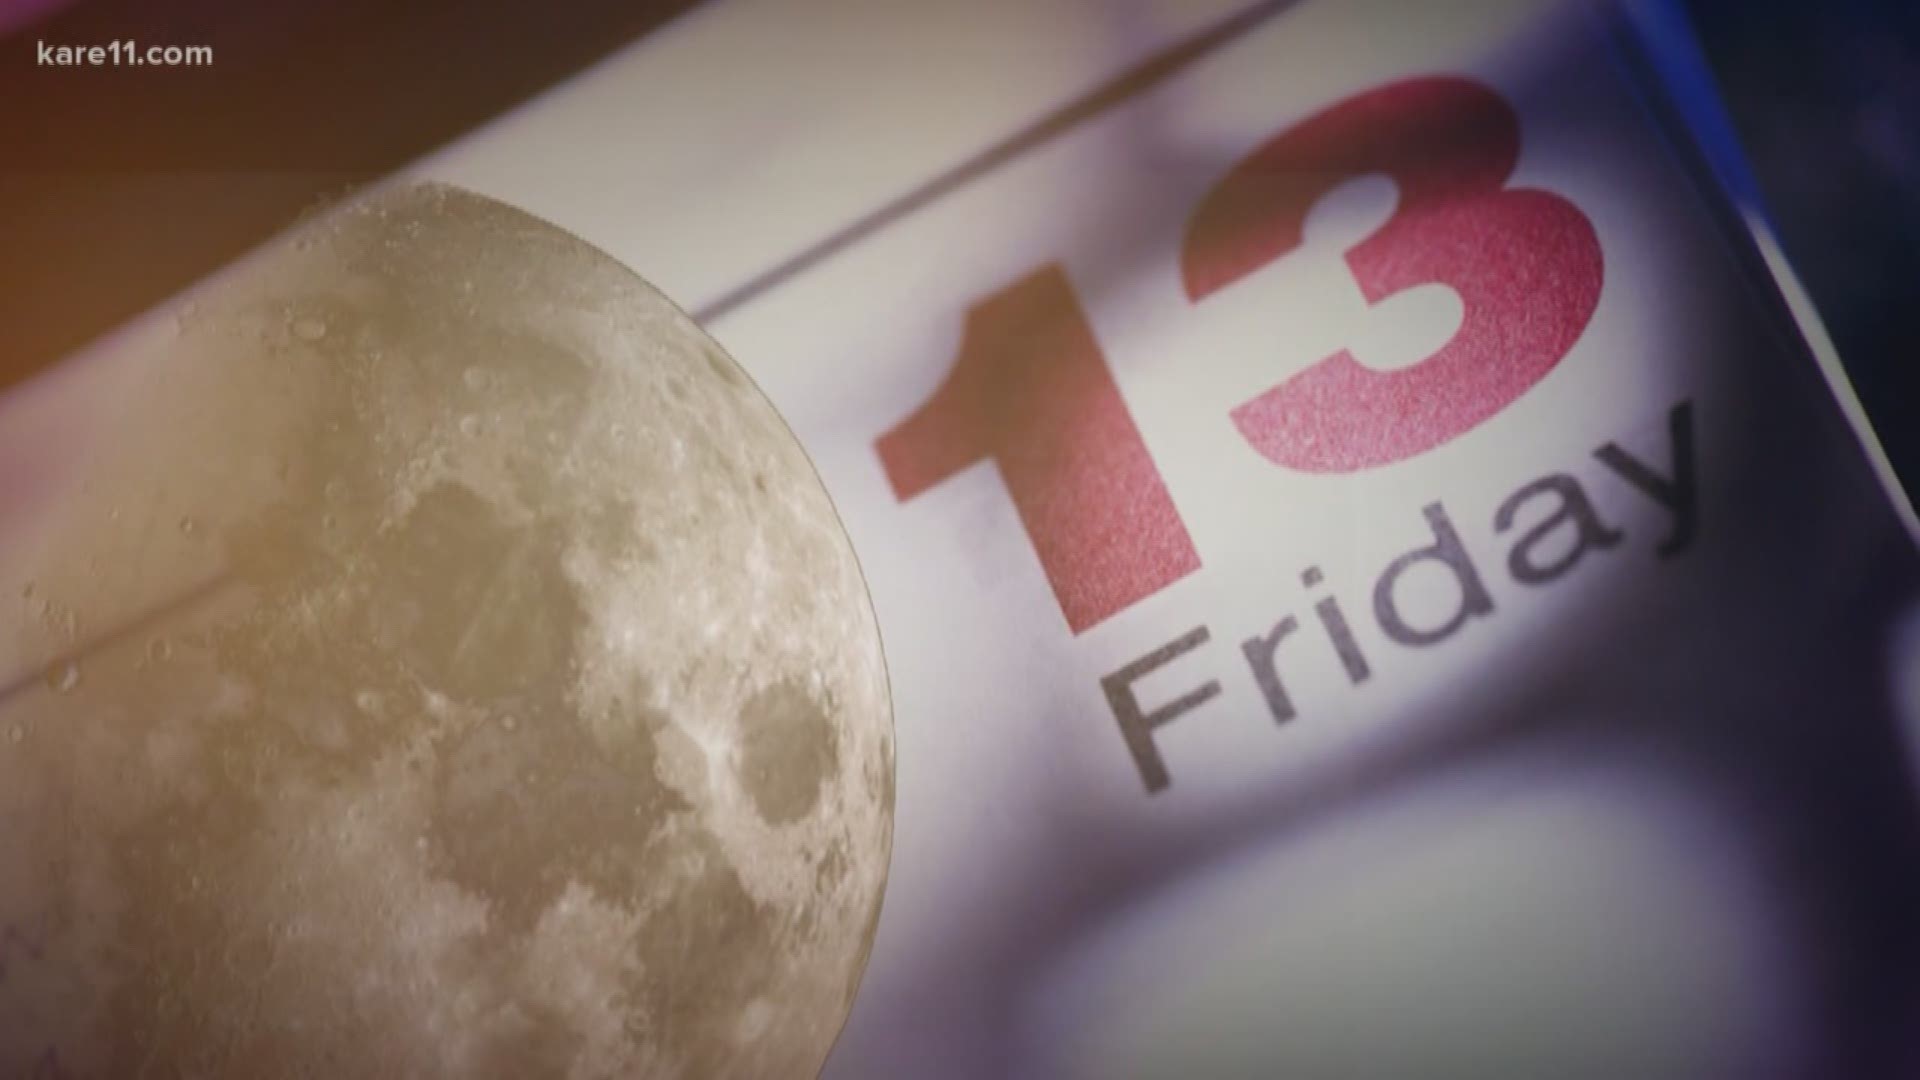 People are already superstitious about Friday the 13th. Adding a rare full moon to the mix it causes additional anxiety. What's the deal?